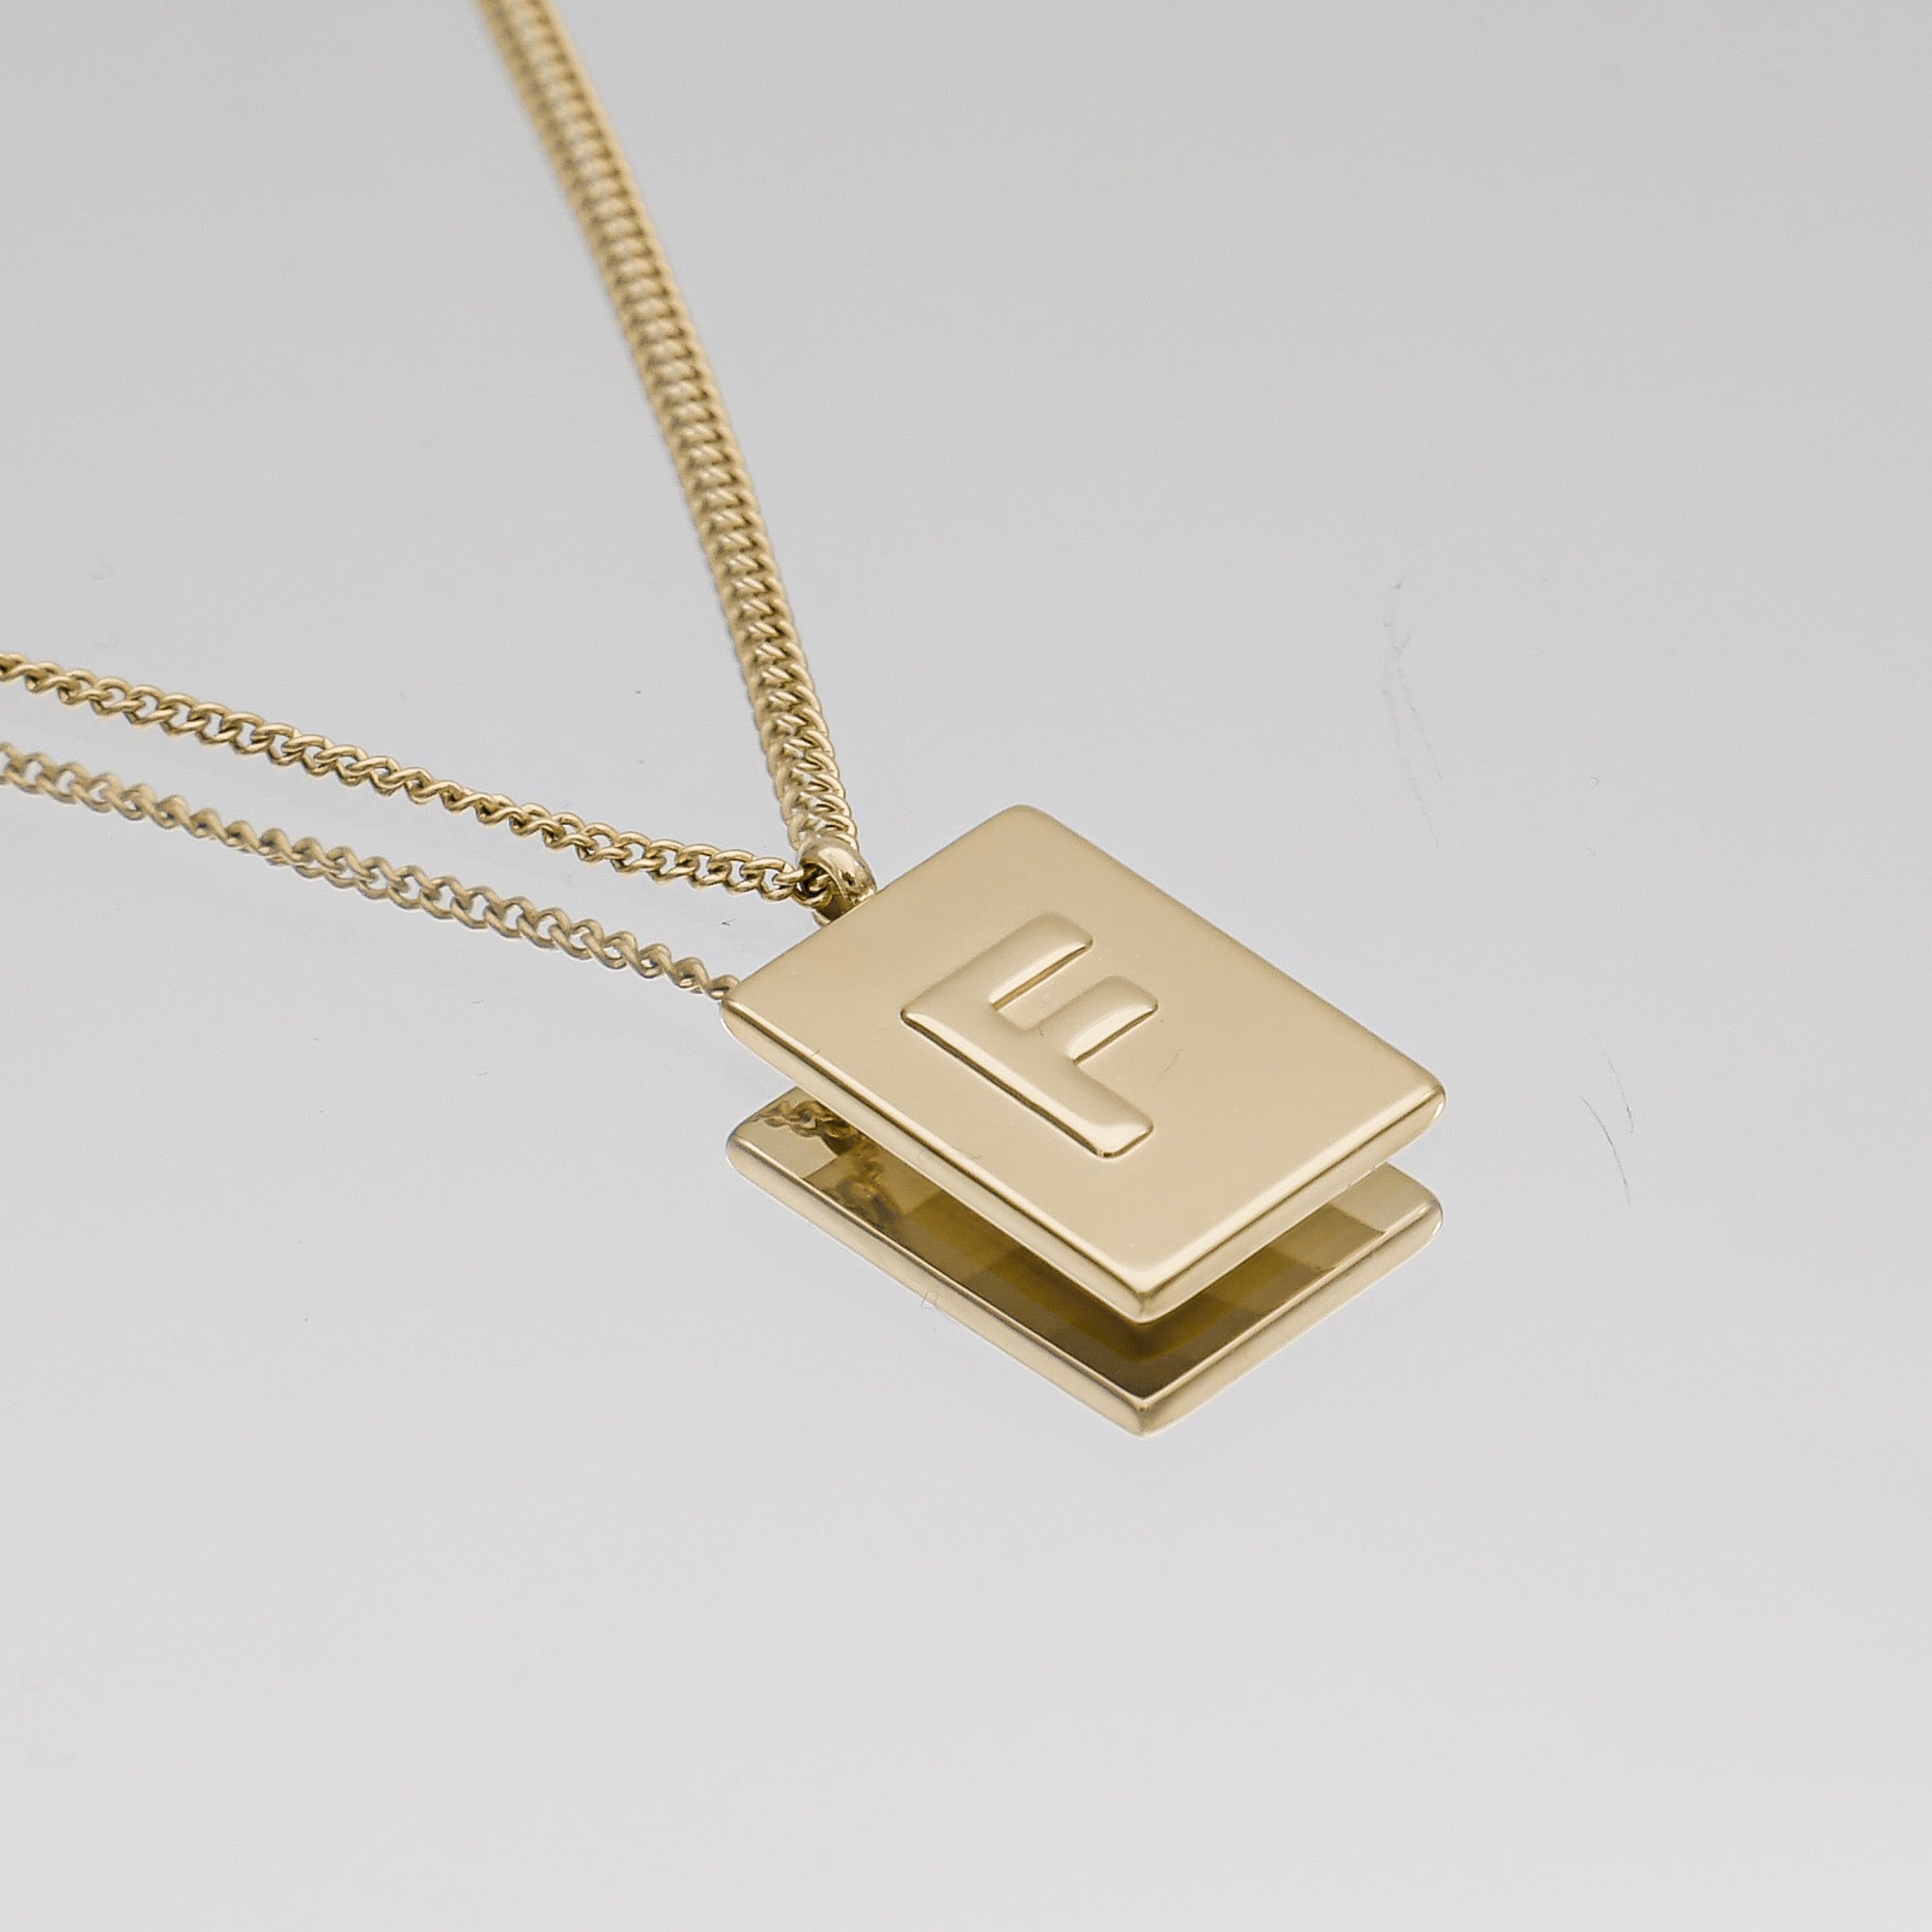 Athena custom initial Gold pendant Necklace, letter F by PRYA